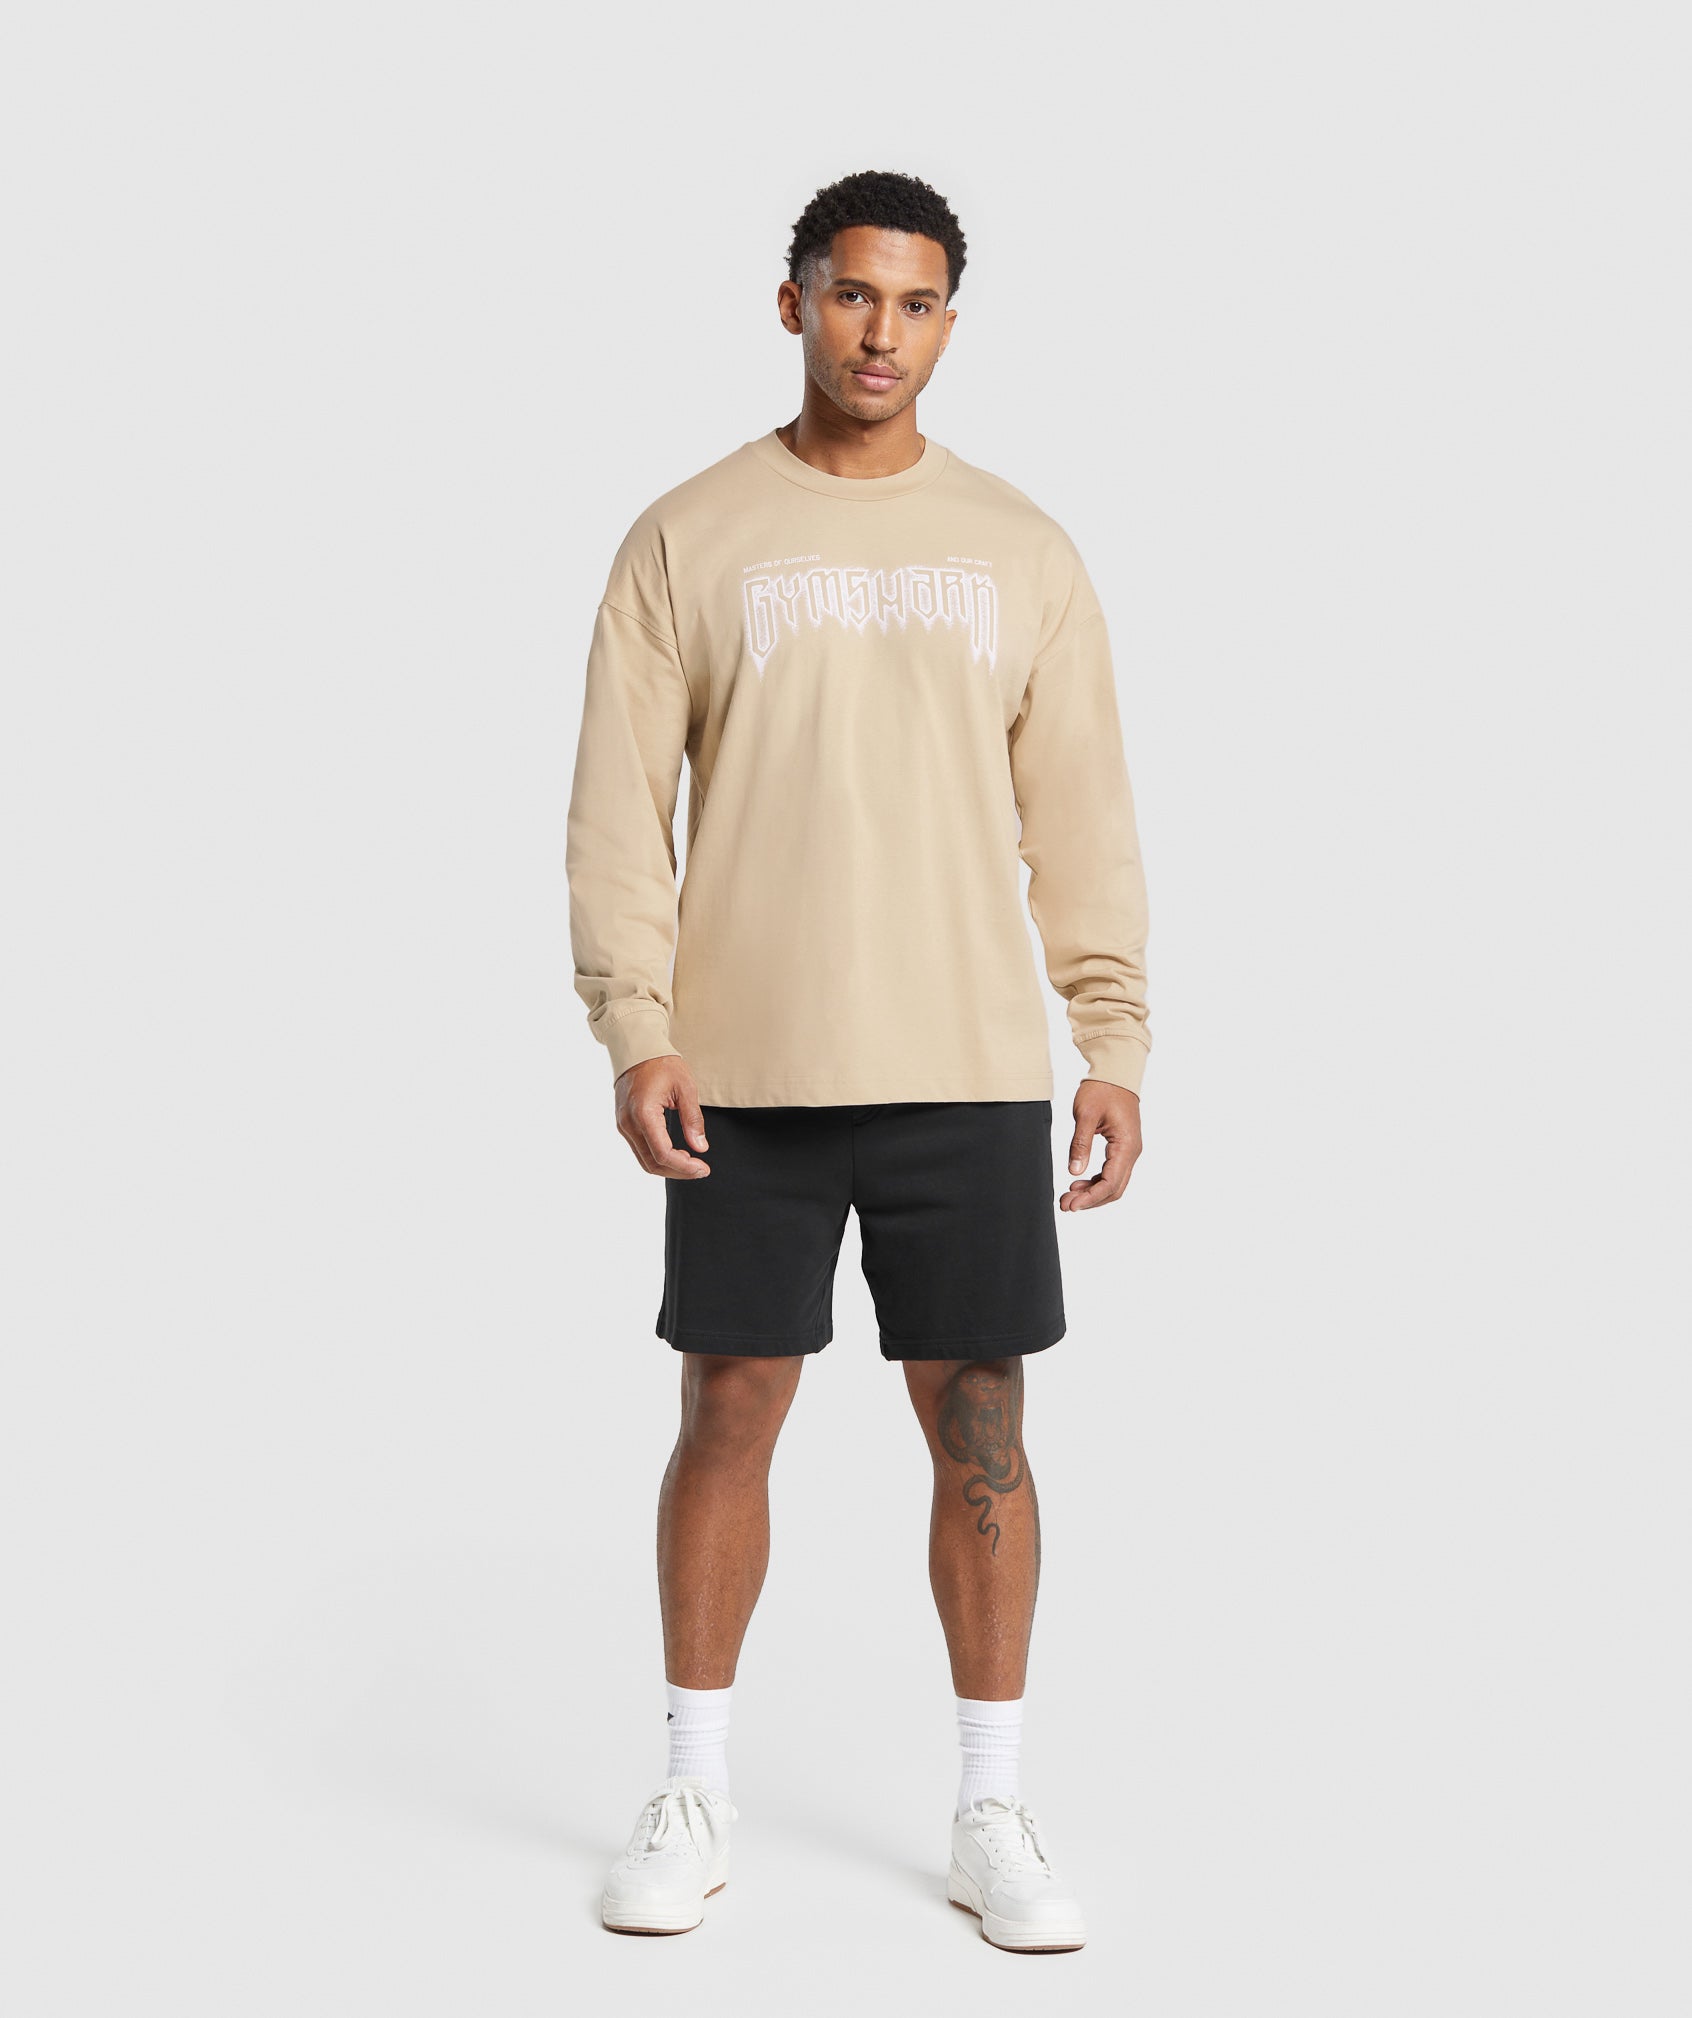 Masters of Our Craft Long Sleeve T-Shirt in Vanilla Beige - view 4